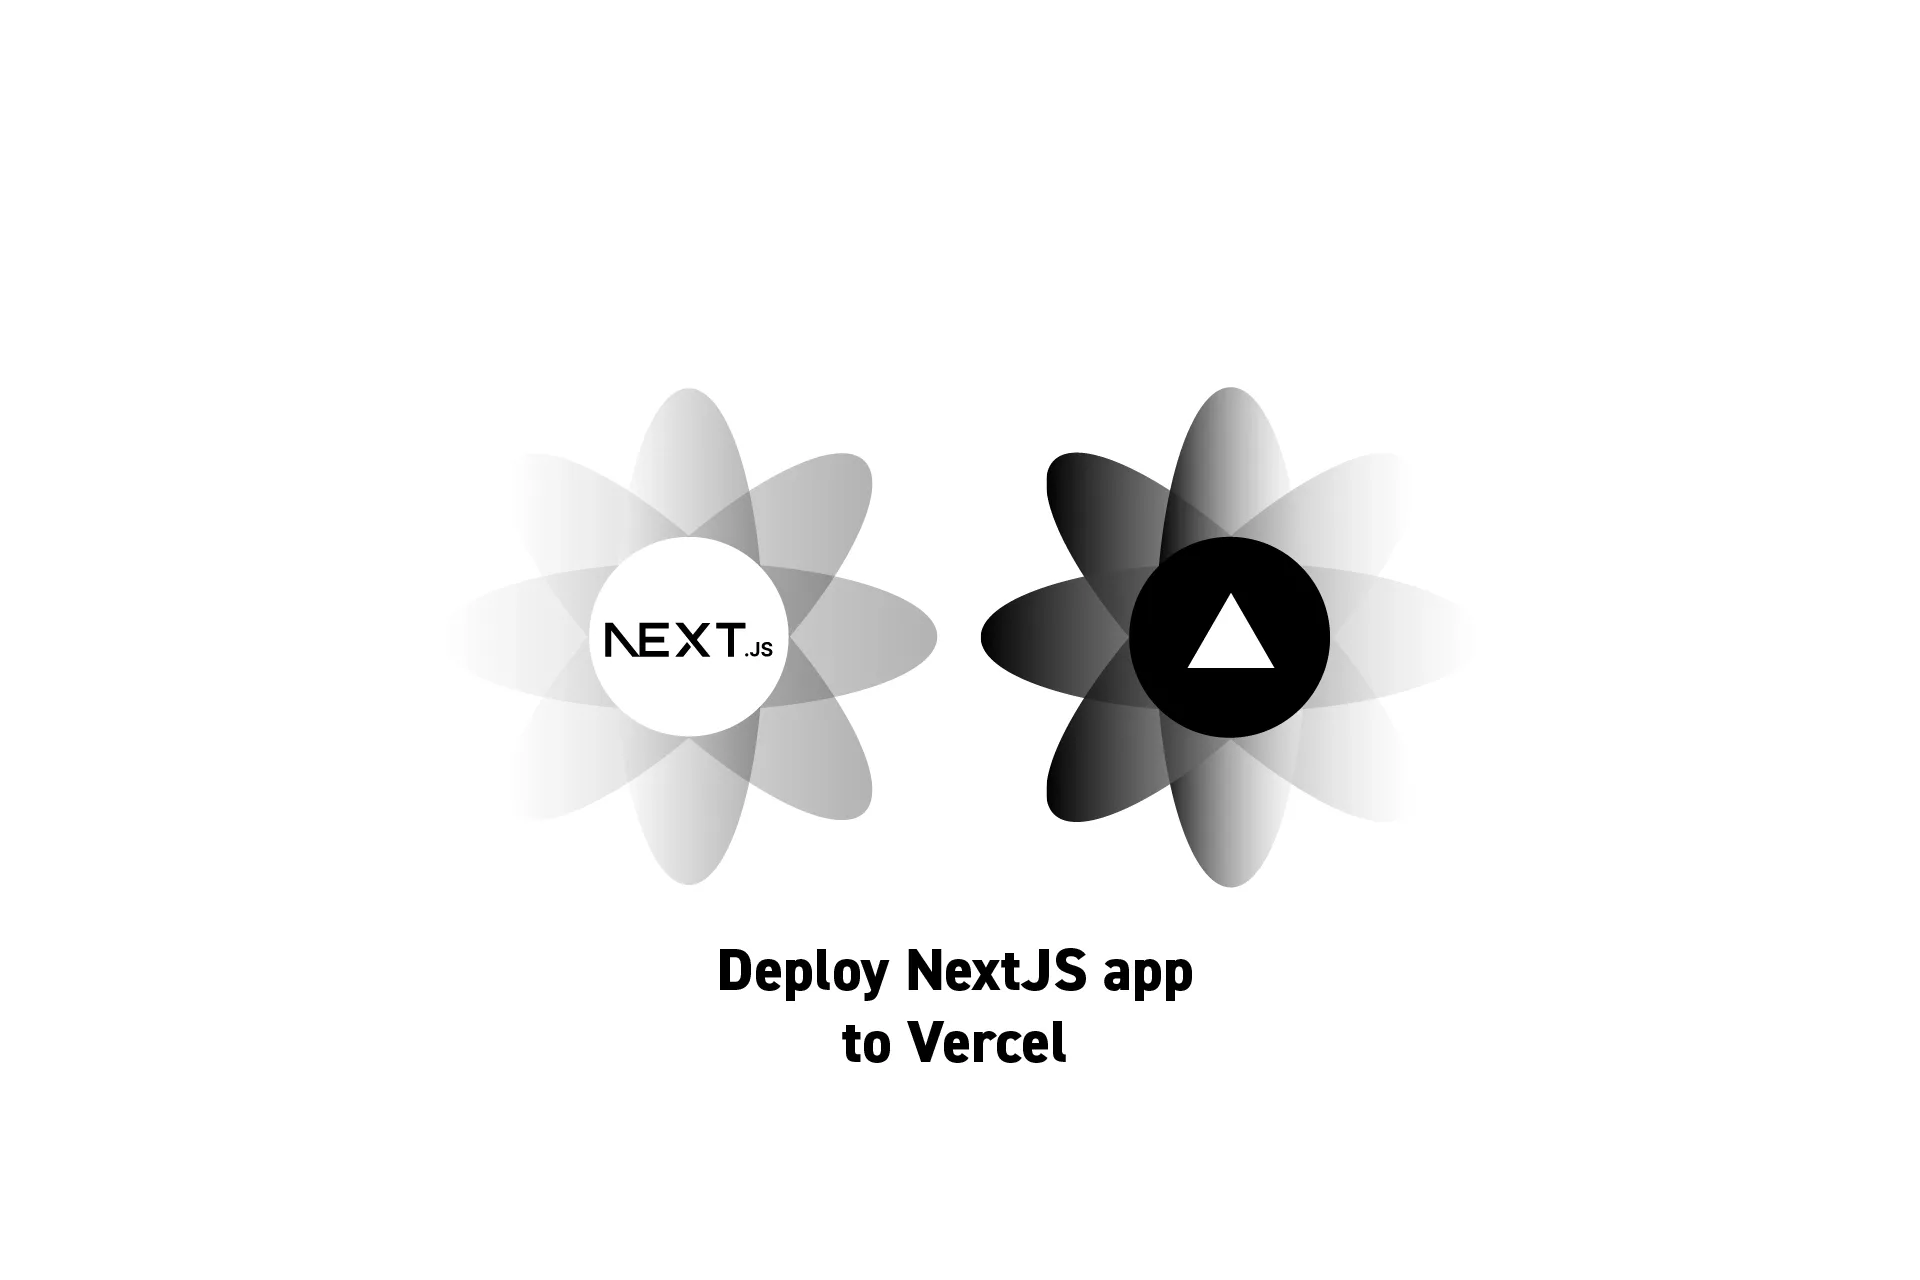 Two flowers that represents NextJS and Vercel side by side with the text "Deploy NextJS app to Vercel” beneath it.